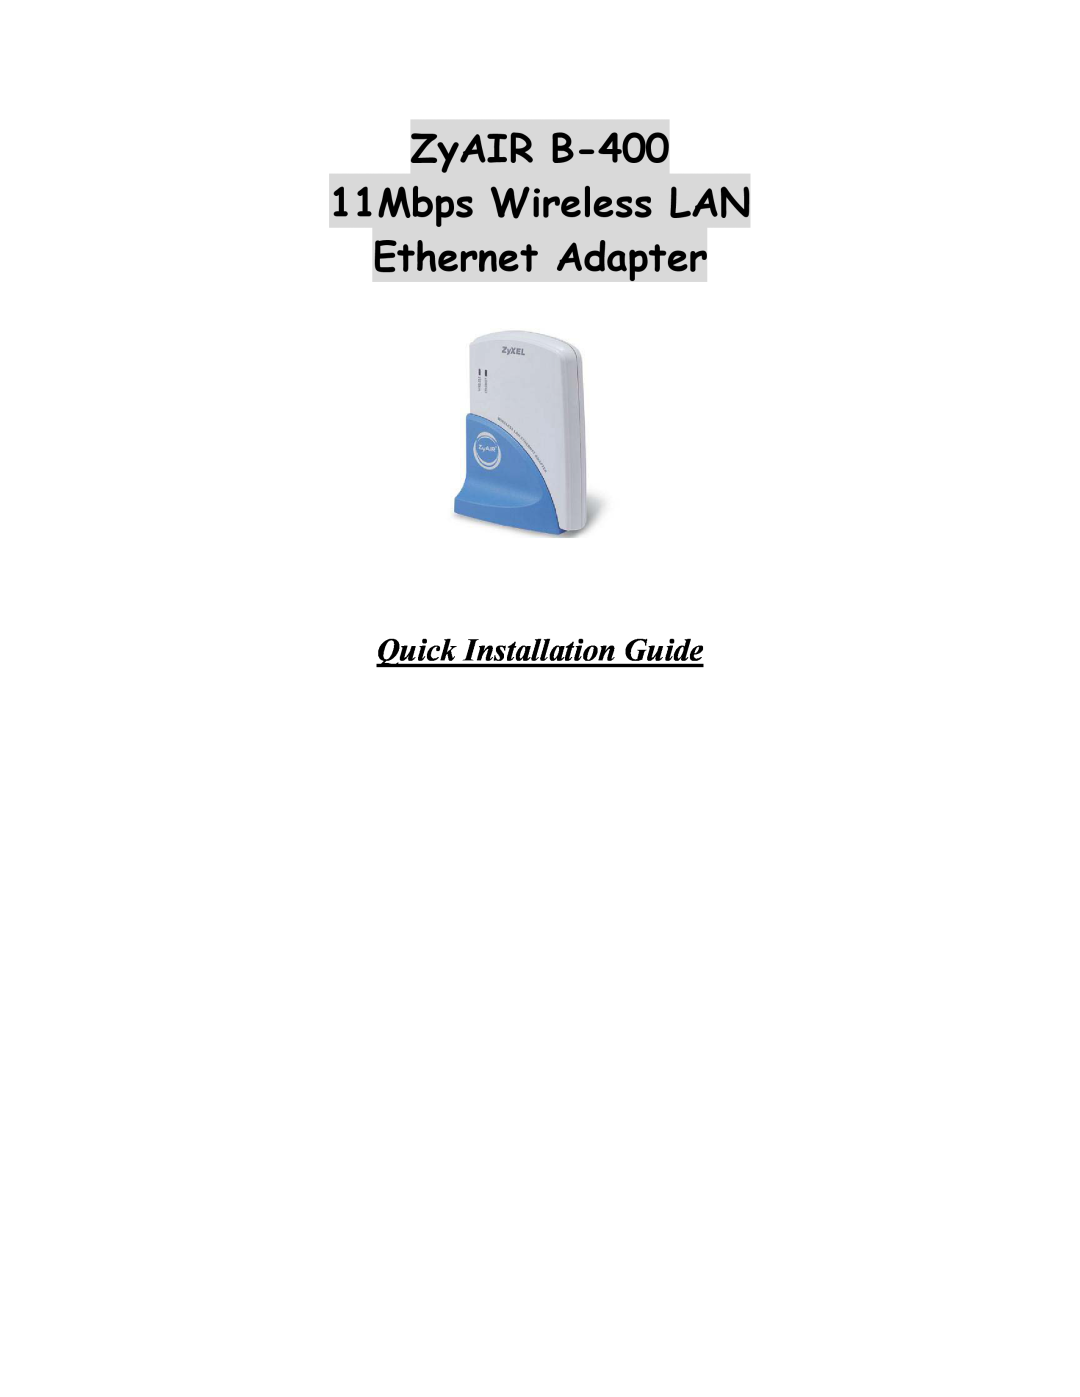 ZyXEL Communications manual ZyAIR B-400 11Mbps Wireless LAN Ethernet Adapter, Quick Installation Guide 